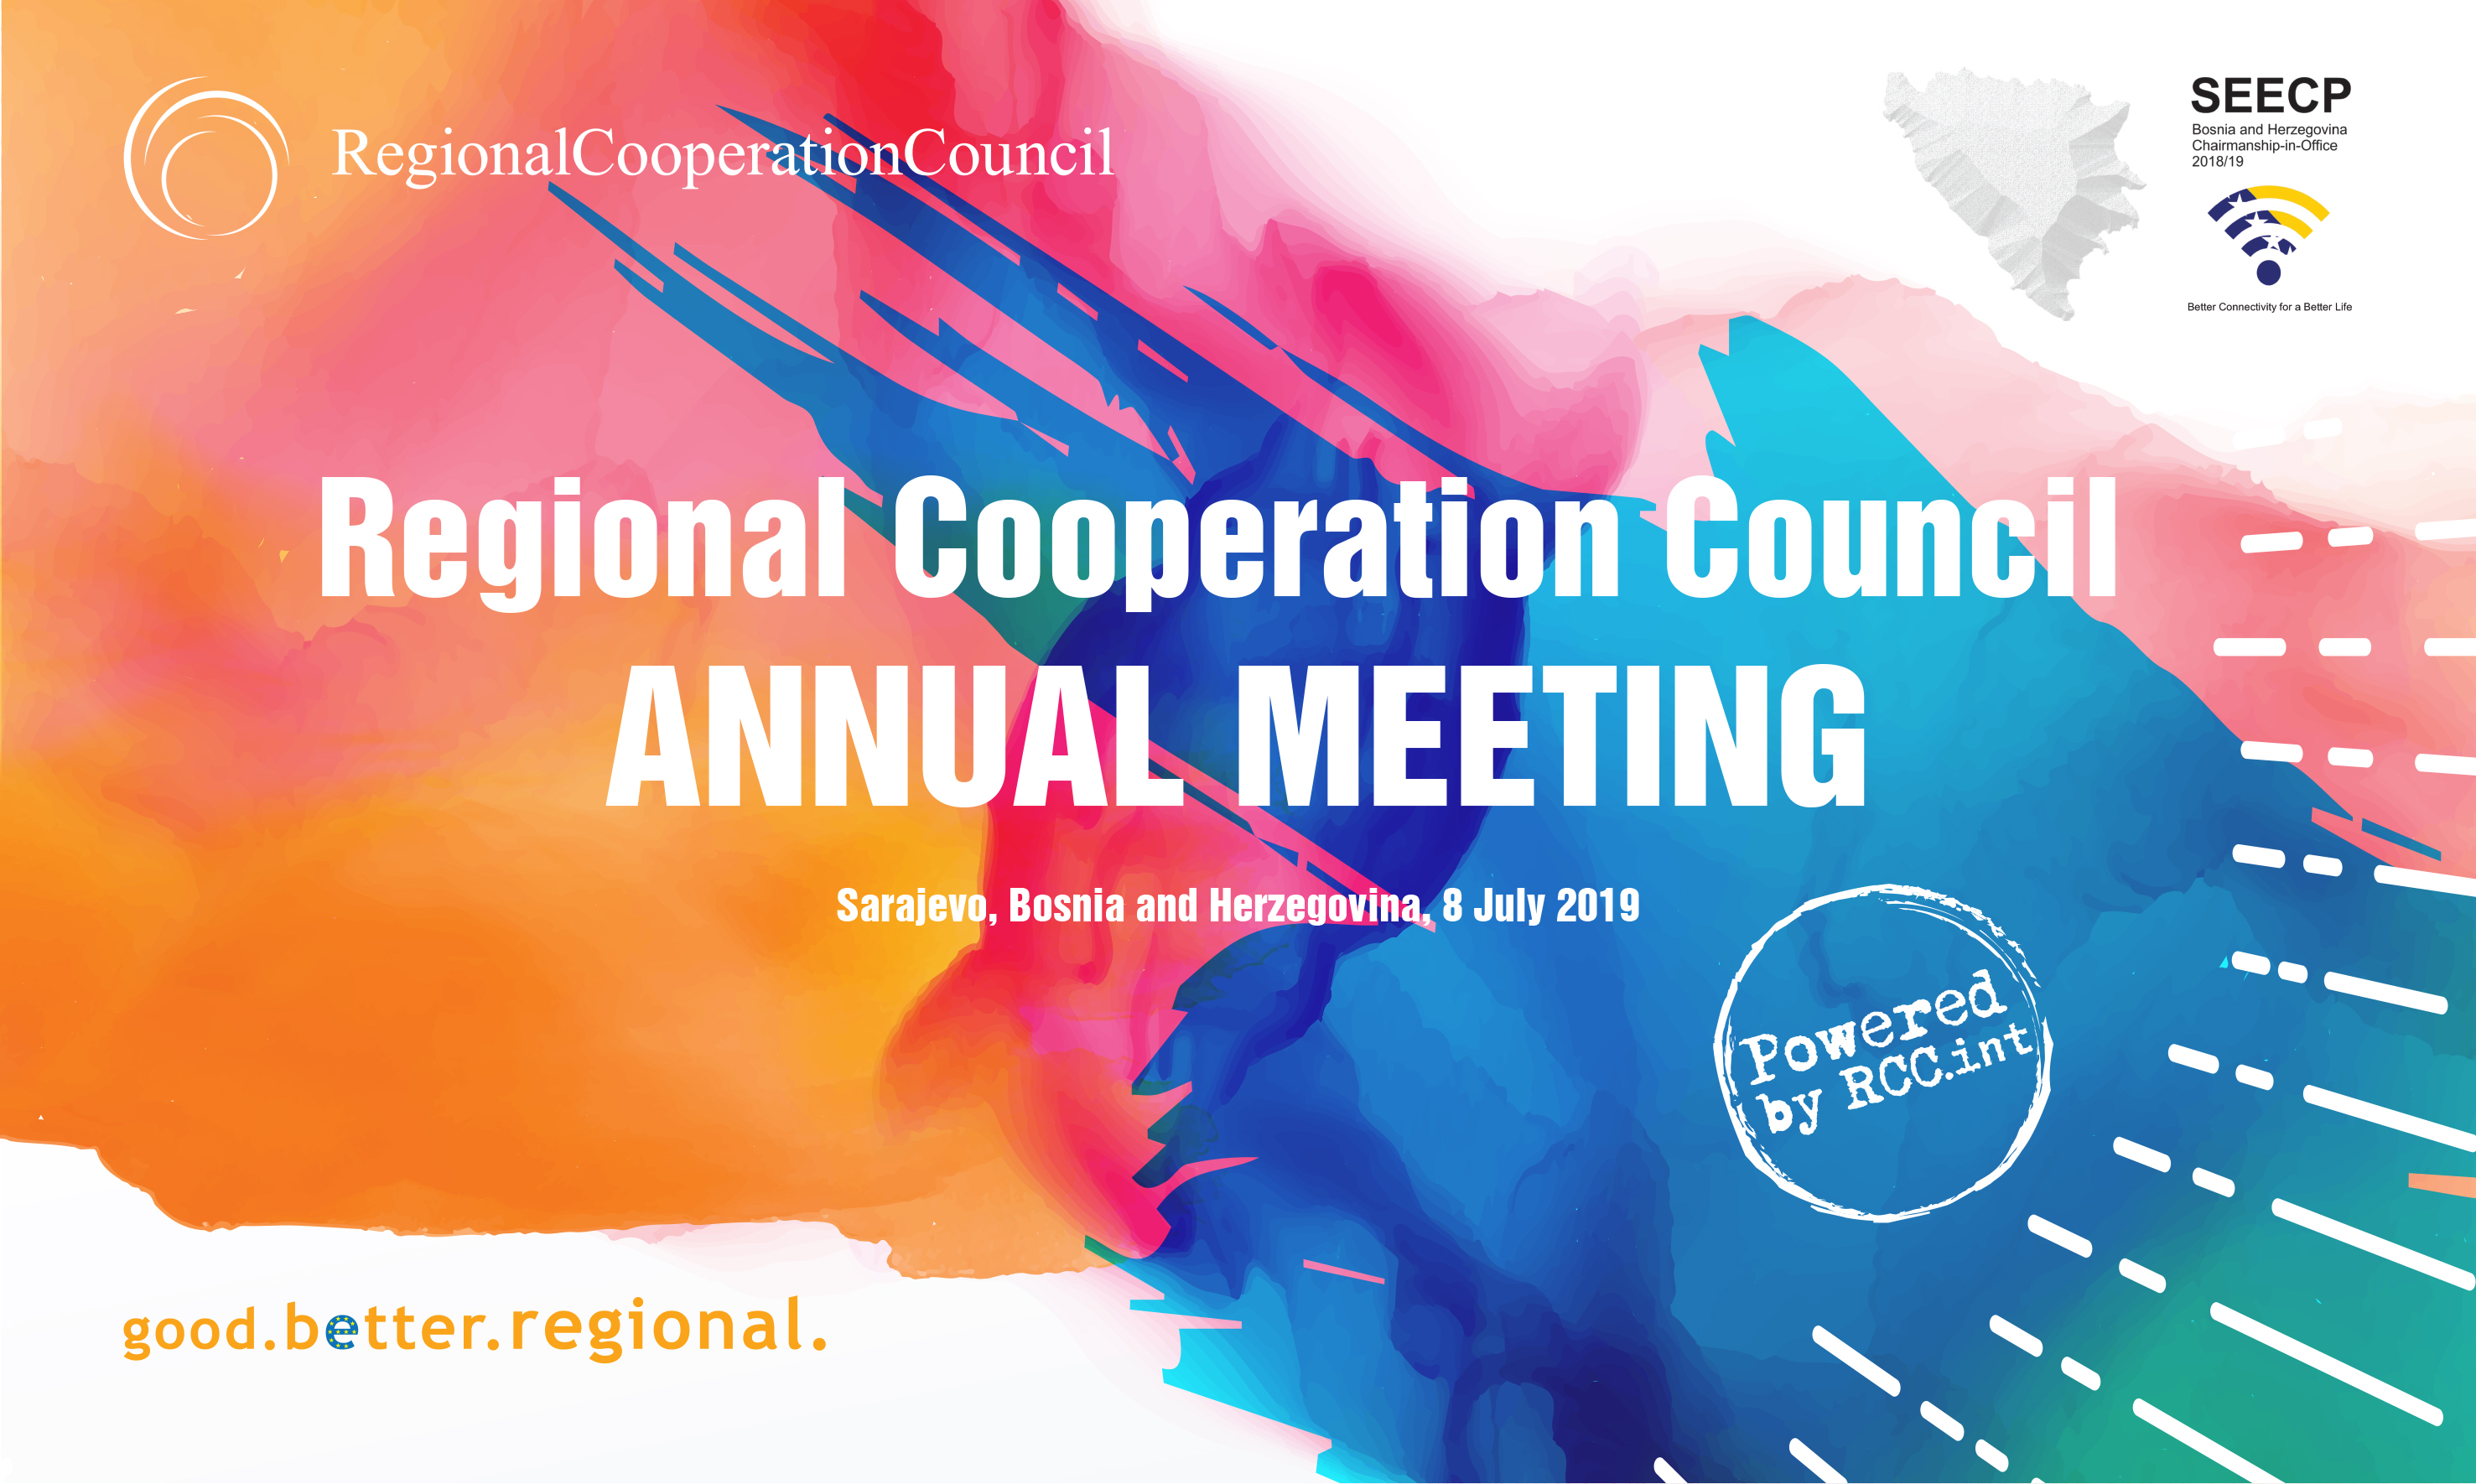 The Annual meeting of the Regional Cooperation Council (RCC) will take place on 8 July 2019 in Sarajevo, Bosnia and Herzegovina (Illustration: RCC/Sejla Dizdarevic)